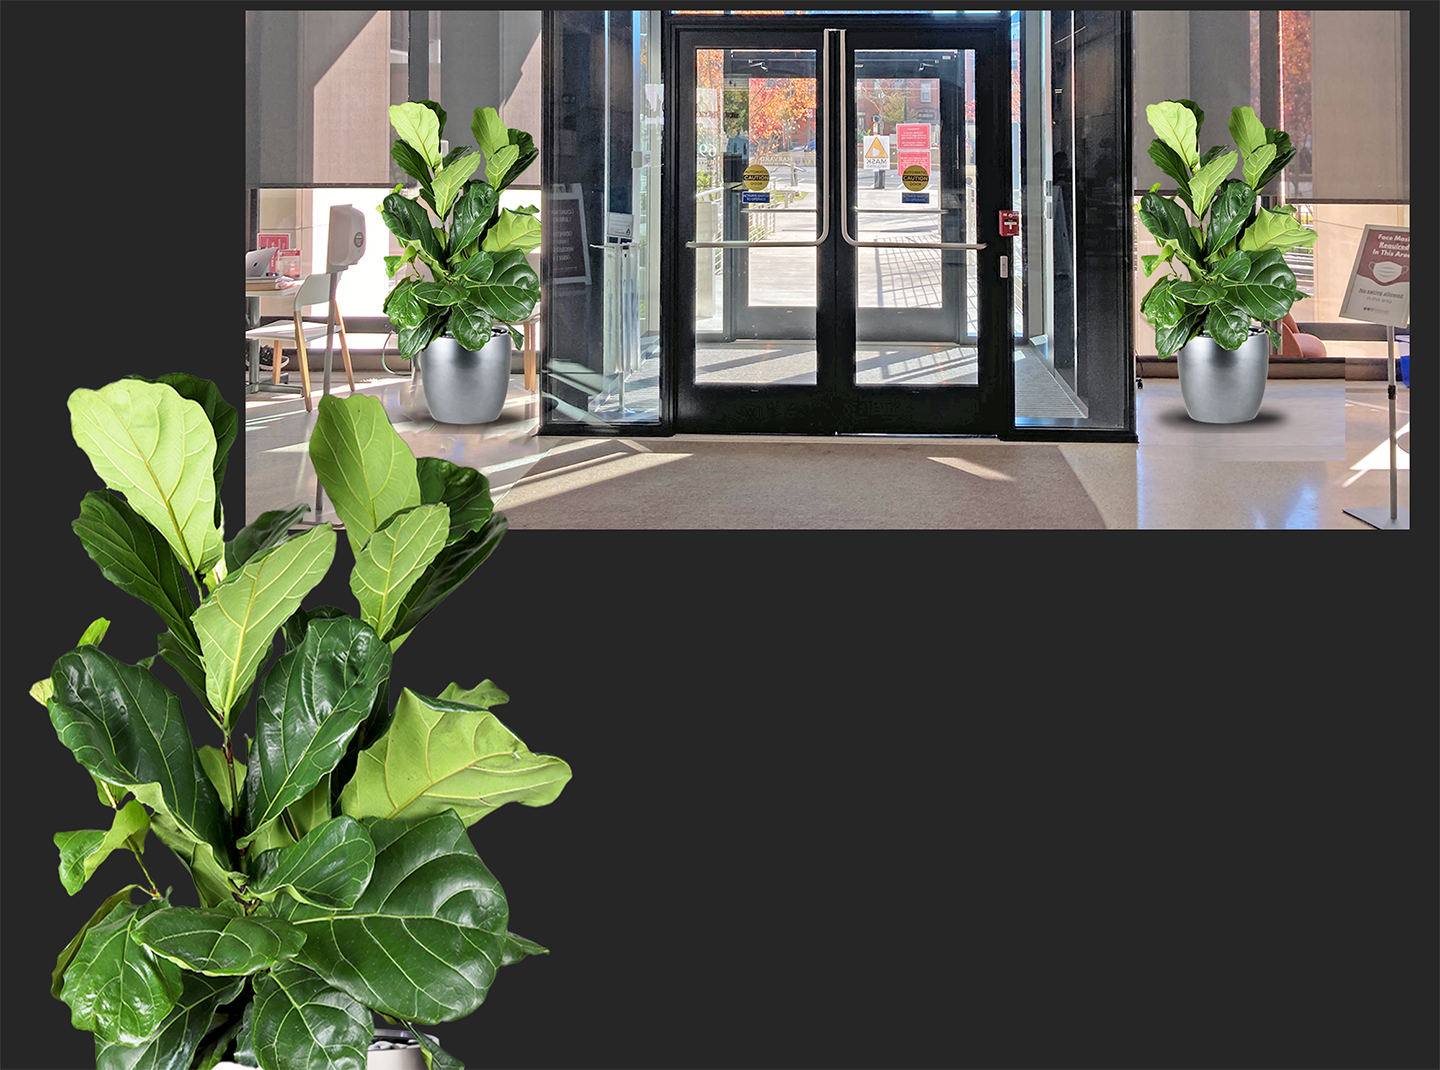 artist's rendition of the new fiddle leaf fig bush plants to be added at the Huntington entrance